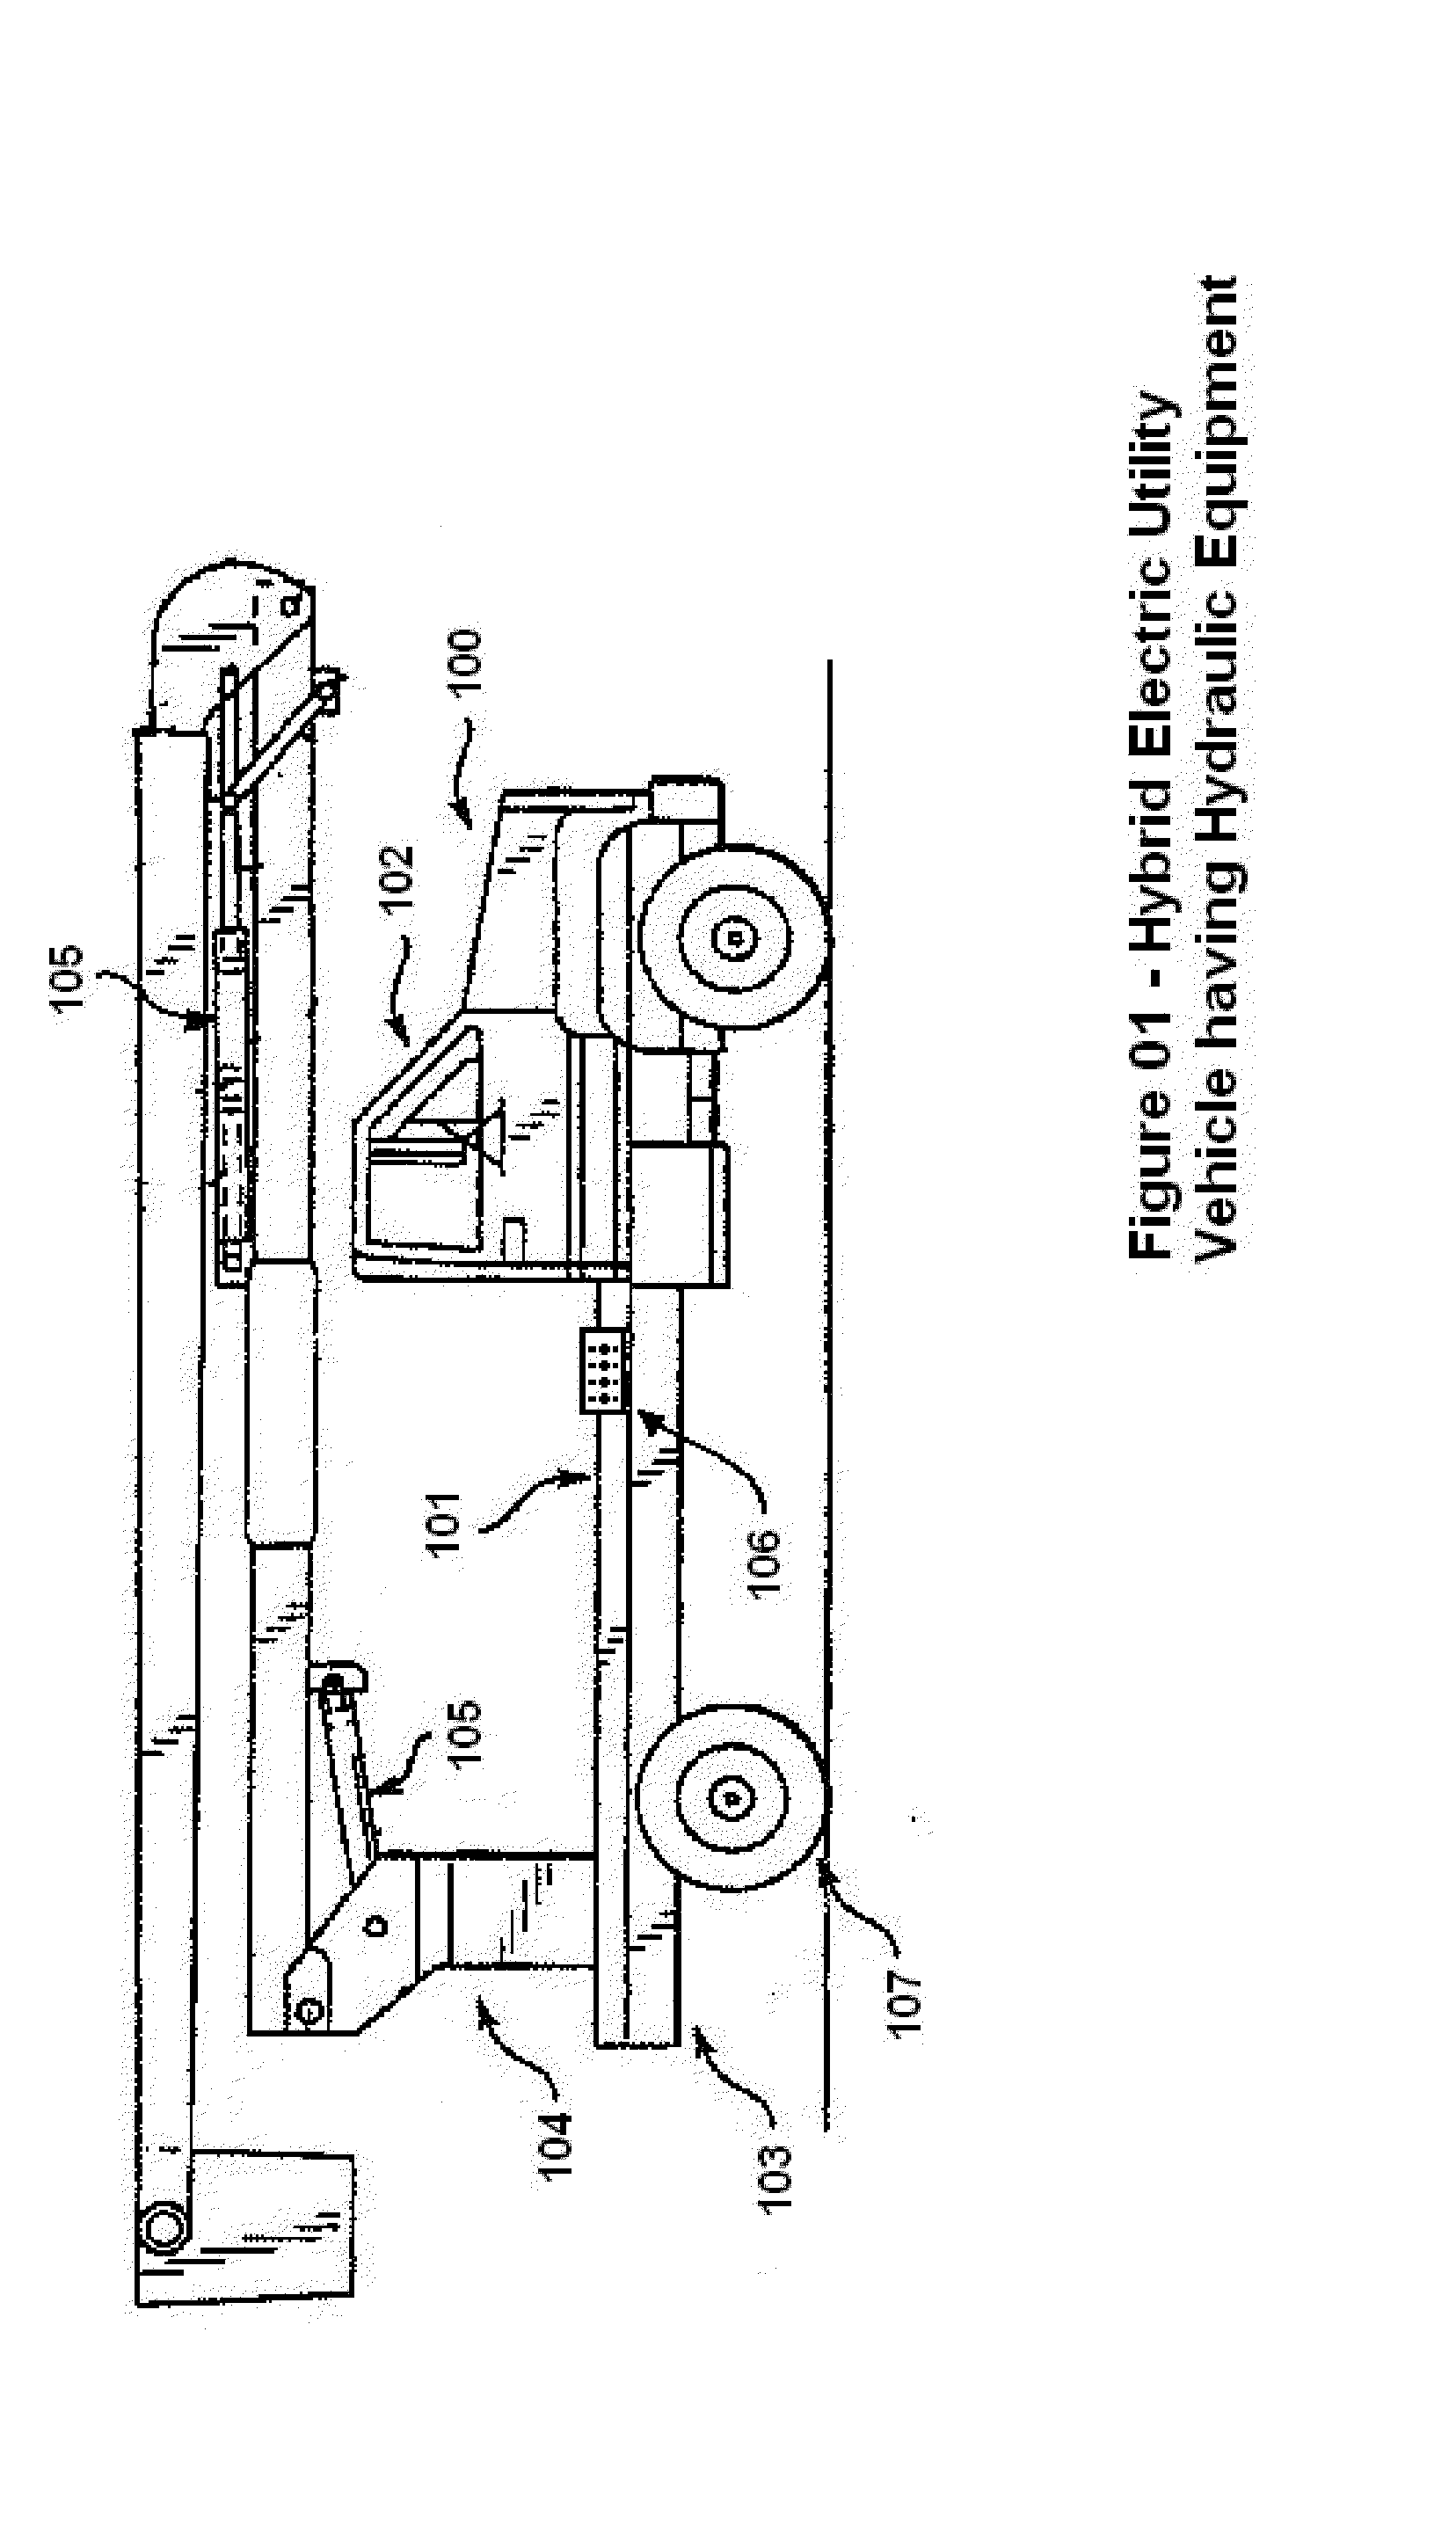 Hybrid Electric Vehicle Traction Motor Driven Power Take-Off Control System